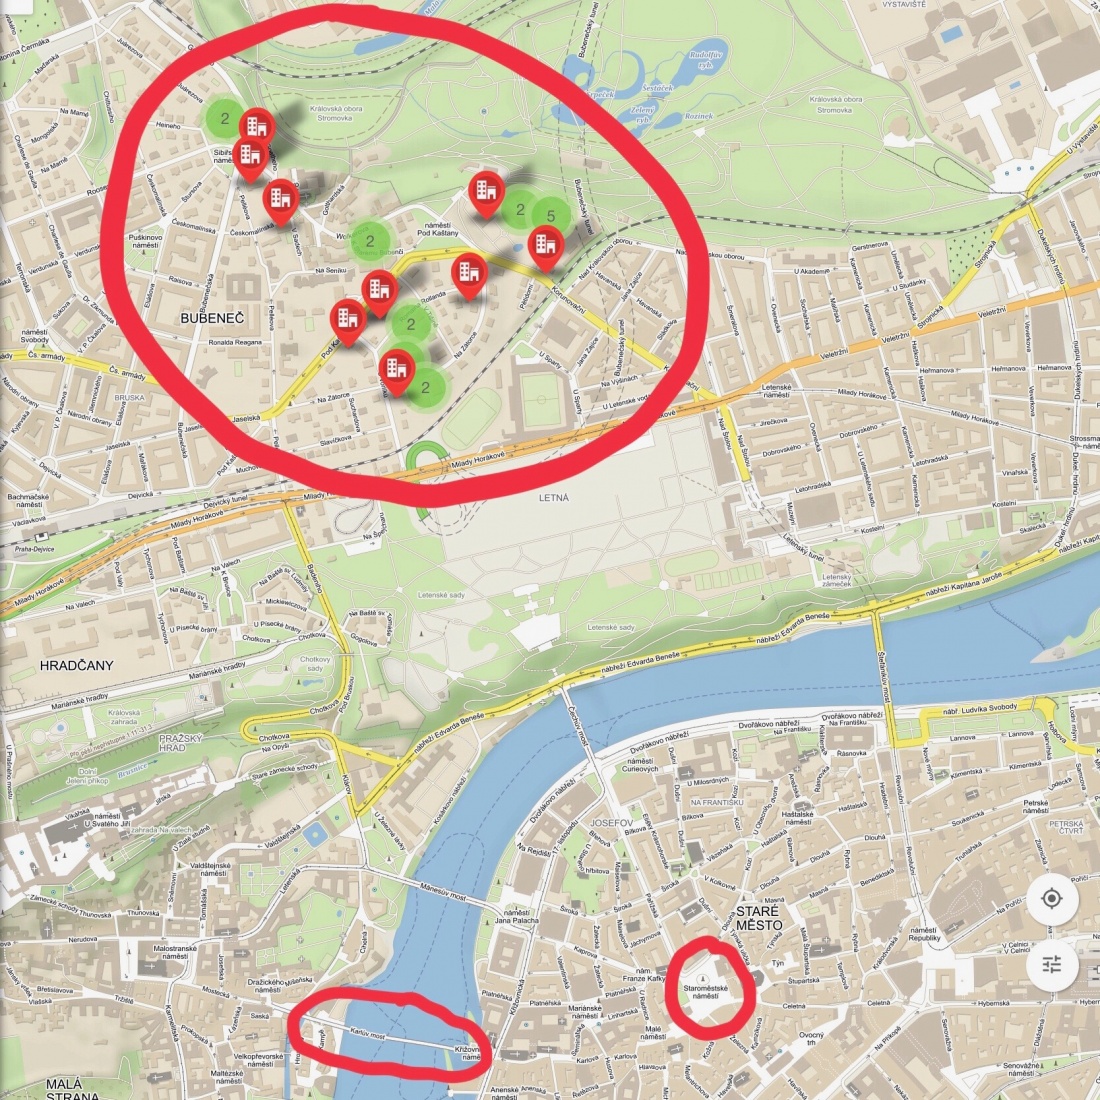 Screenshot from hlidacipes.org, showing Bubeneč (Little Moscow, Little Russia) on the map, in relation to popular tourist spots: the Charles Bridge and Old Town Square.